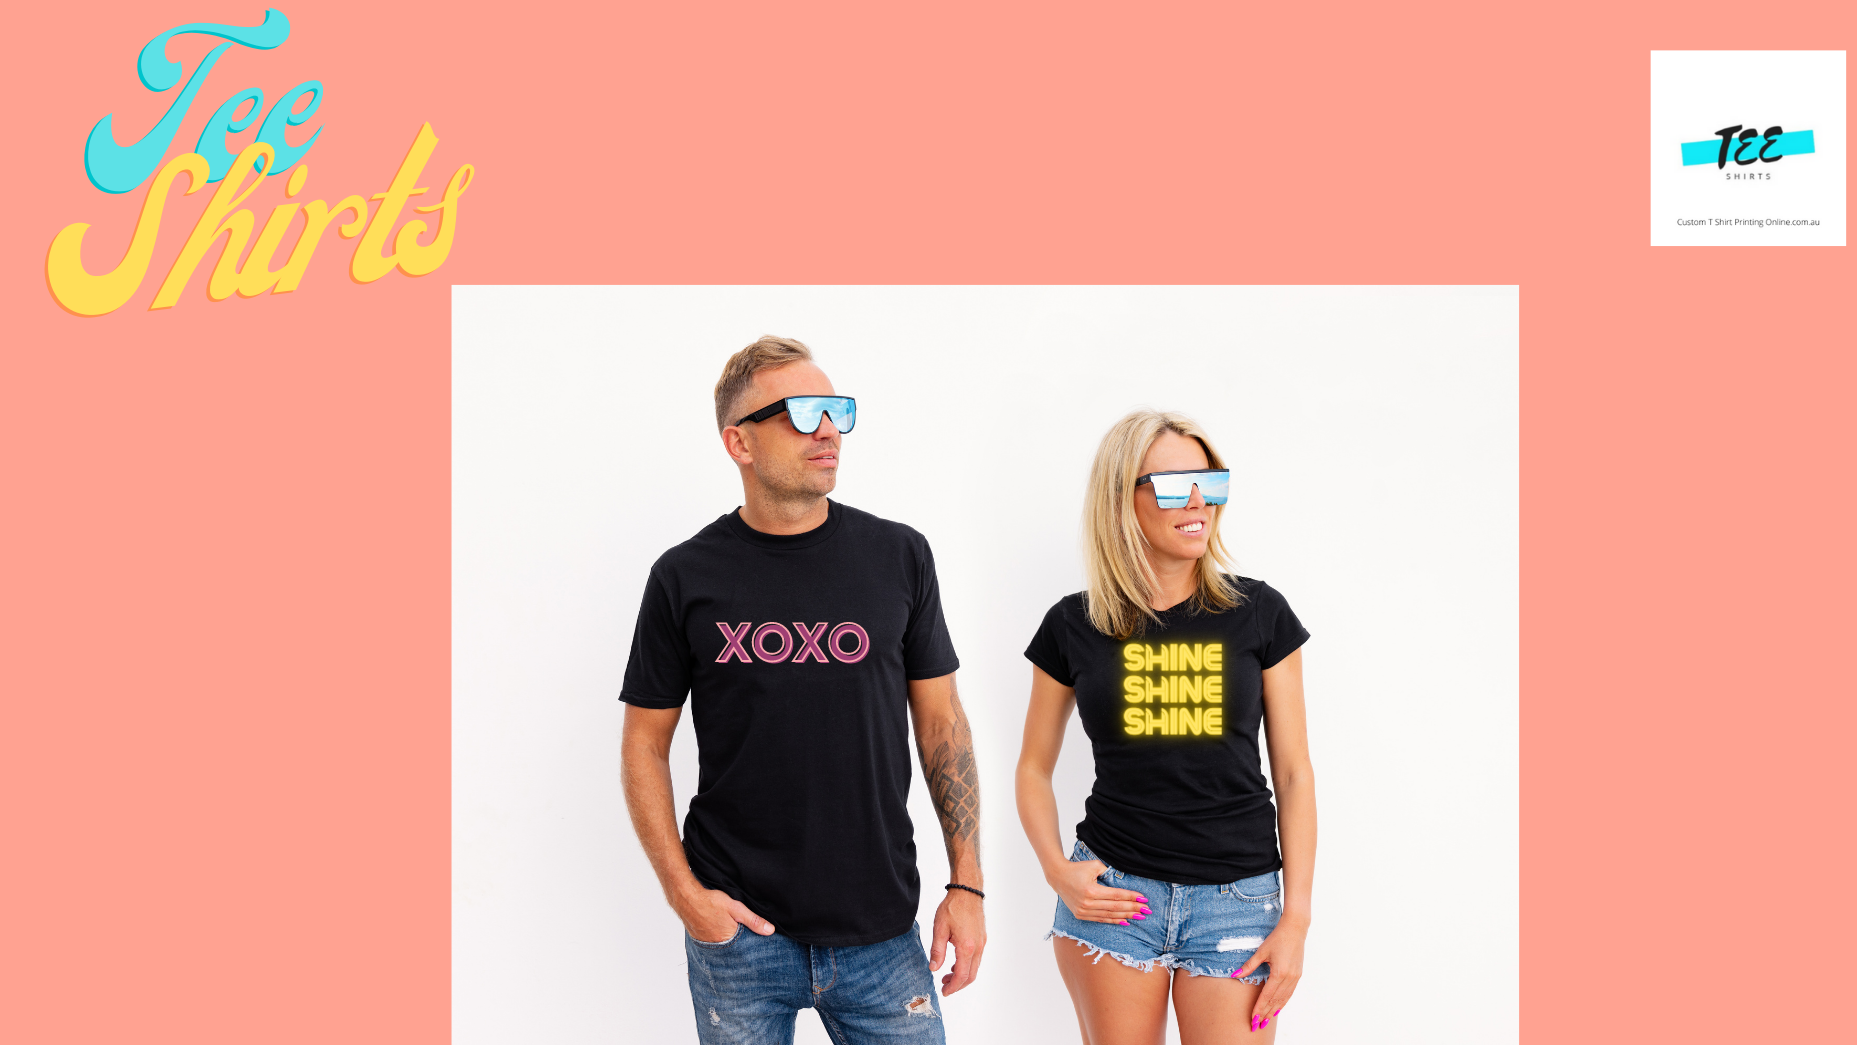 Get The Best Brisbane CBD Custom-Designed Printed T-Shirts For Corporate Events